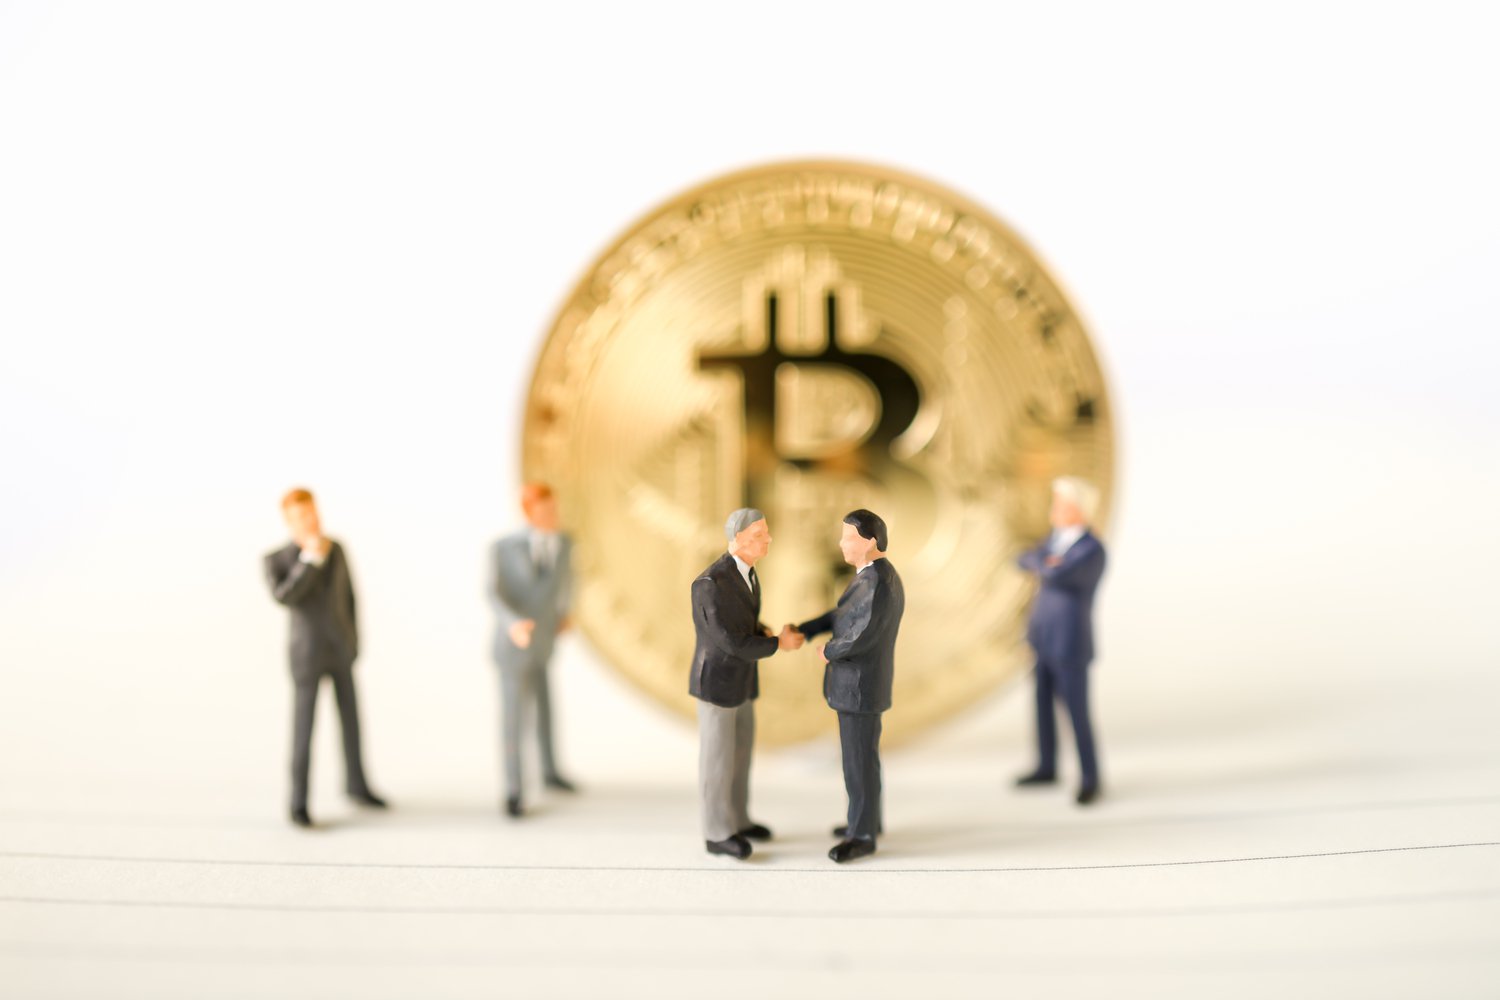 Wyre Acquires Bitcoin Smart Contract Derivatives Platform Hedgy